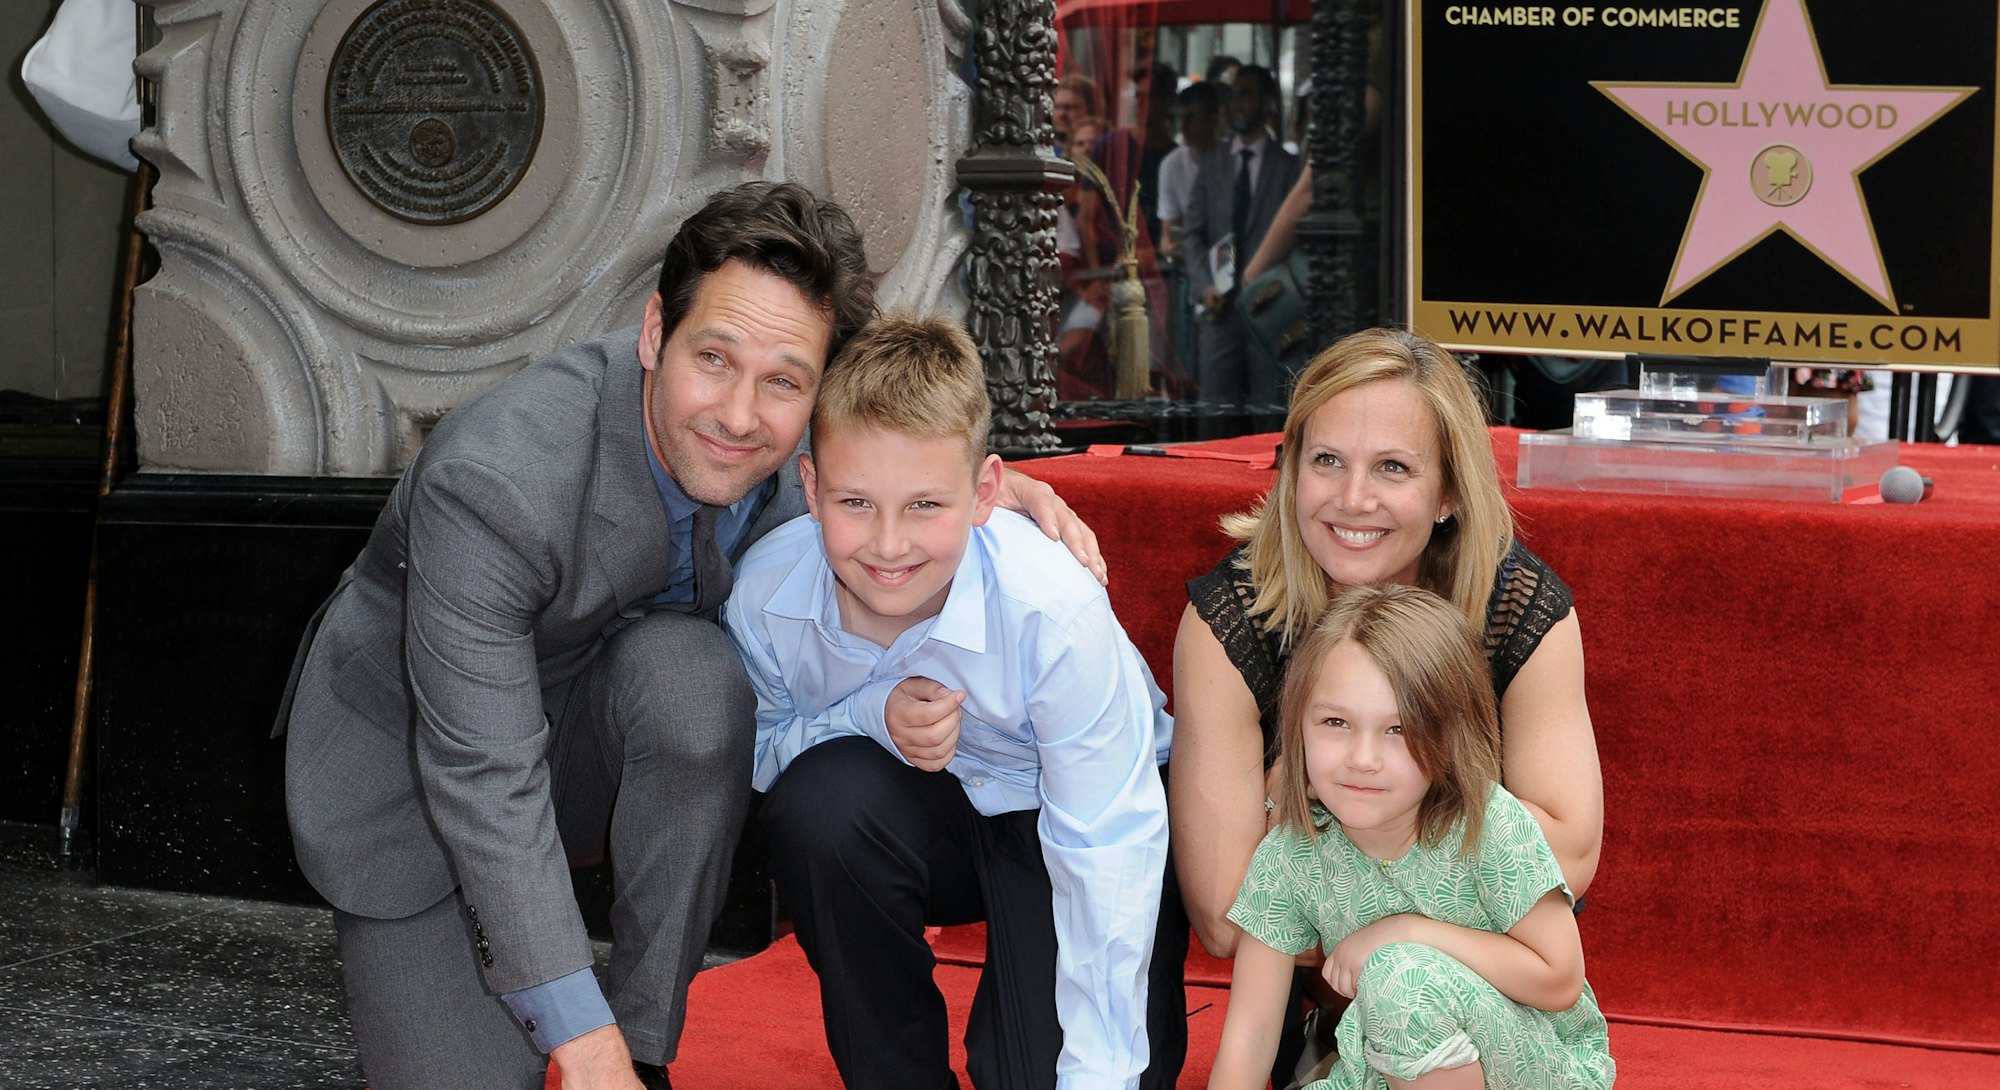 HOLLYWOOD, CA - JULY 01:  Actor Paul Rudd, wife Julie Yaeger, son Jack Rudd and daughter Darby Rudd ...